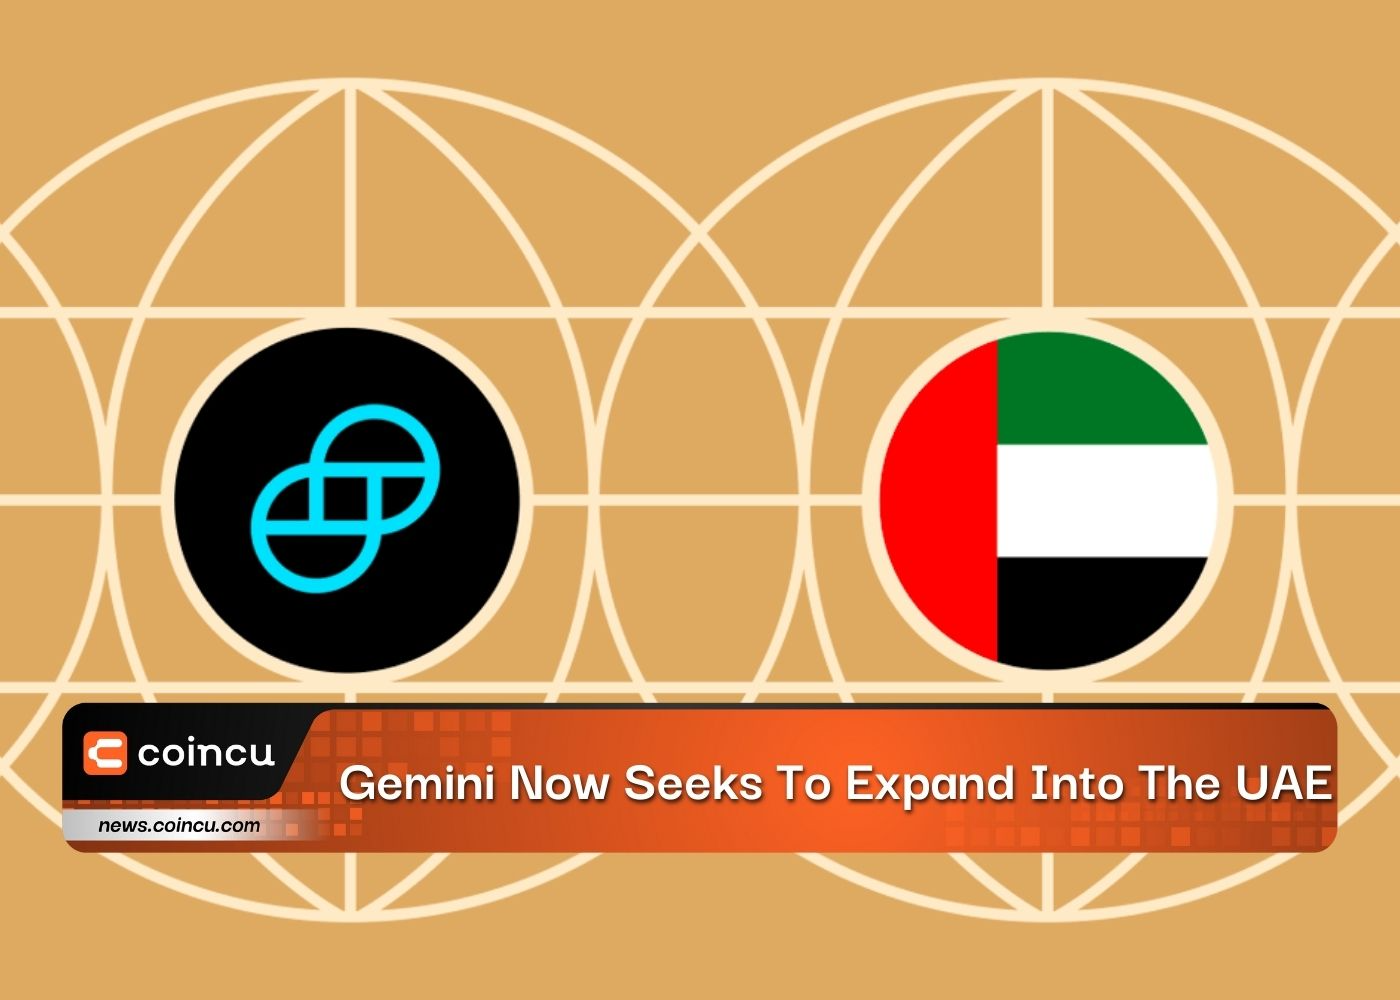 Gemini Now Seeks To Expand Into The UAE